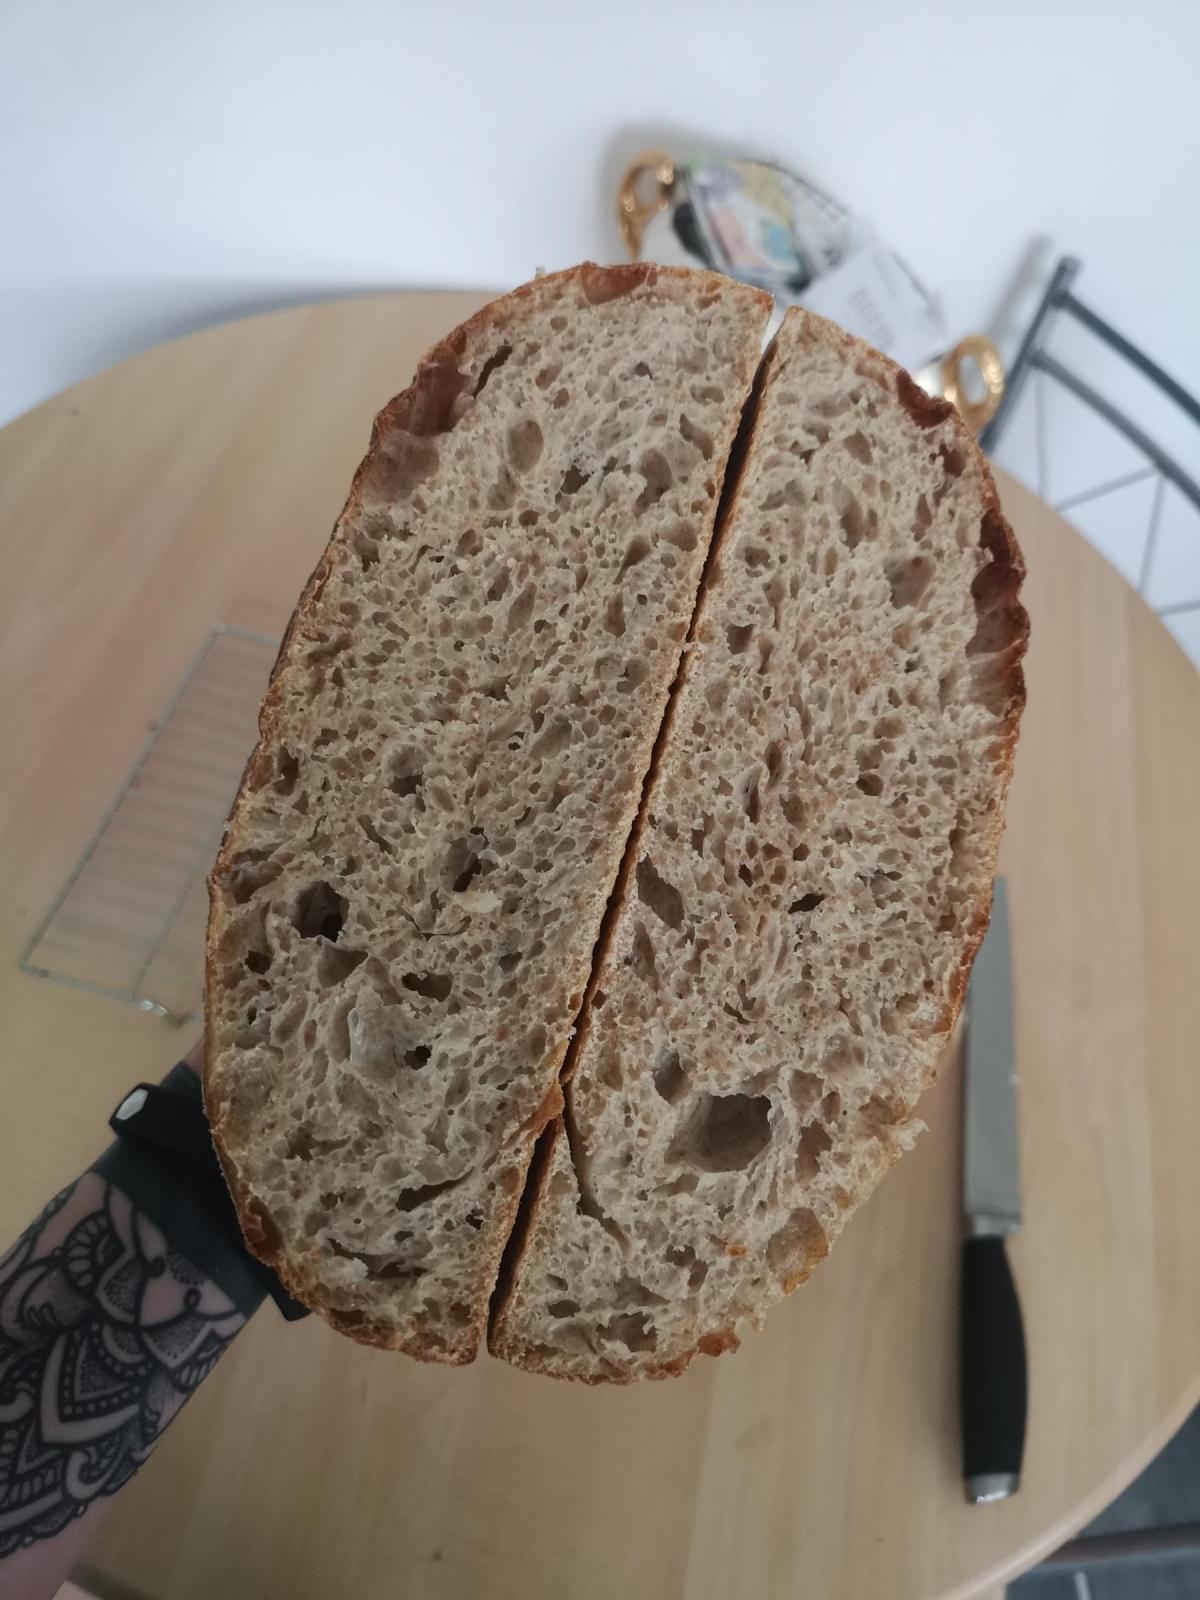 First loaf which stuck to bowl during baking